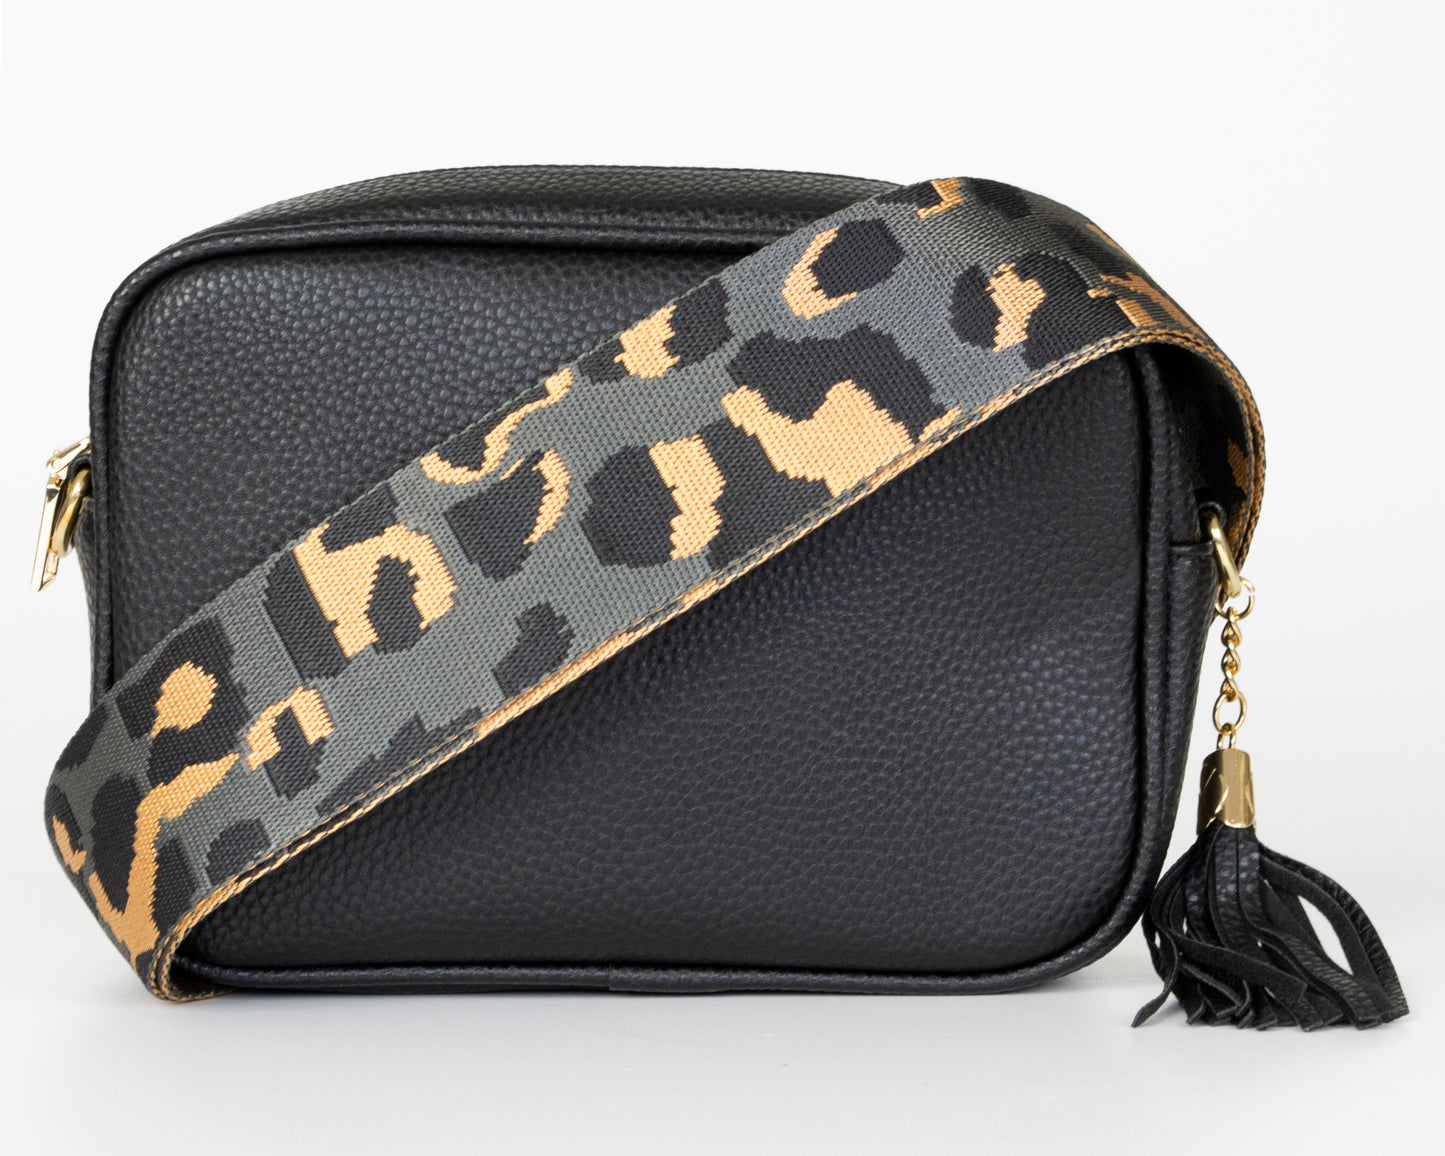 2 Straps Camera Bag with Leopard Pattern Strap